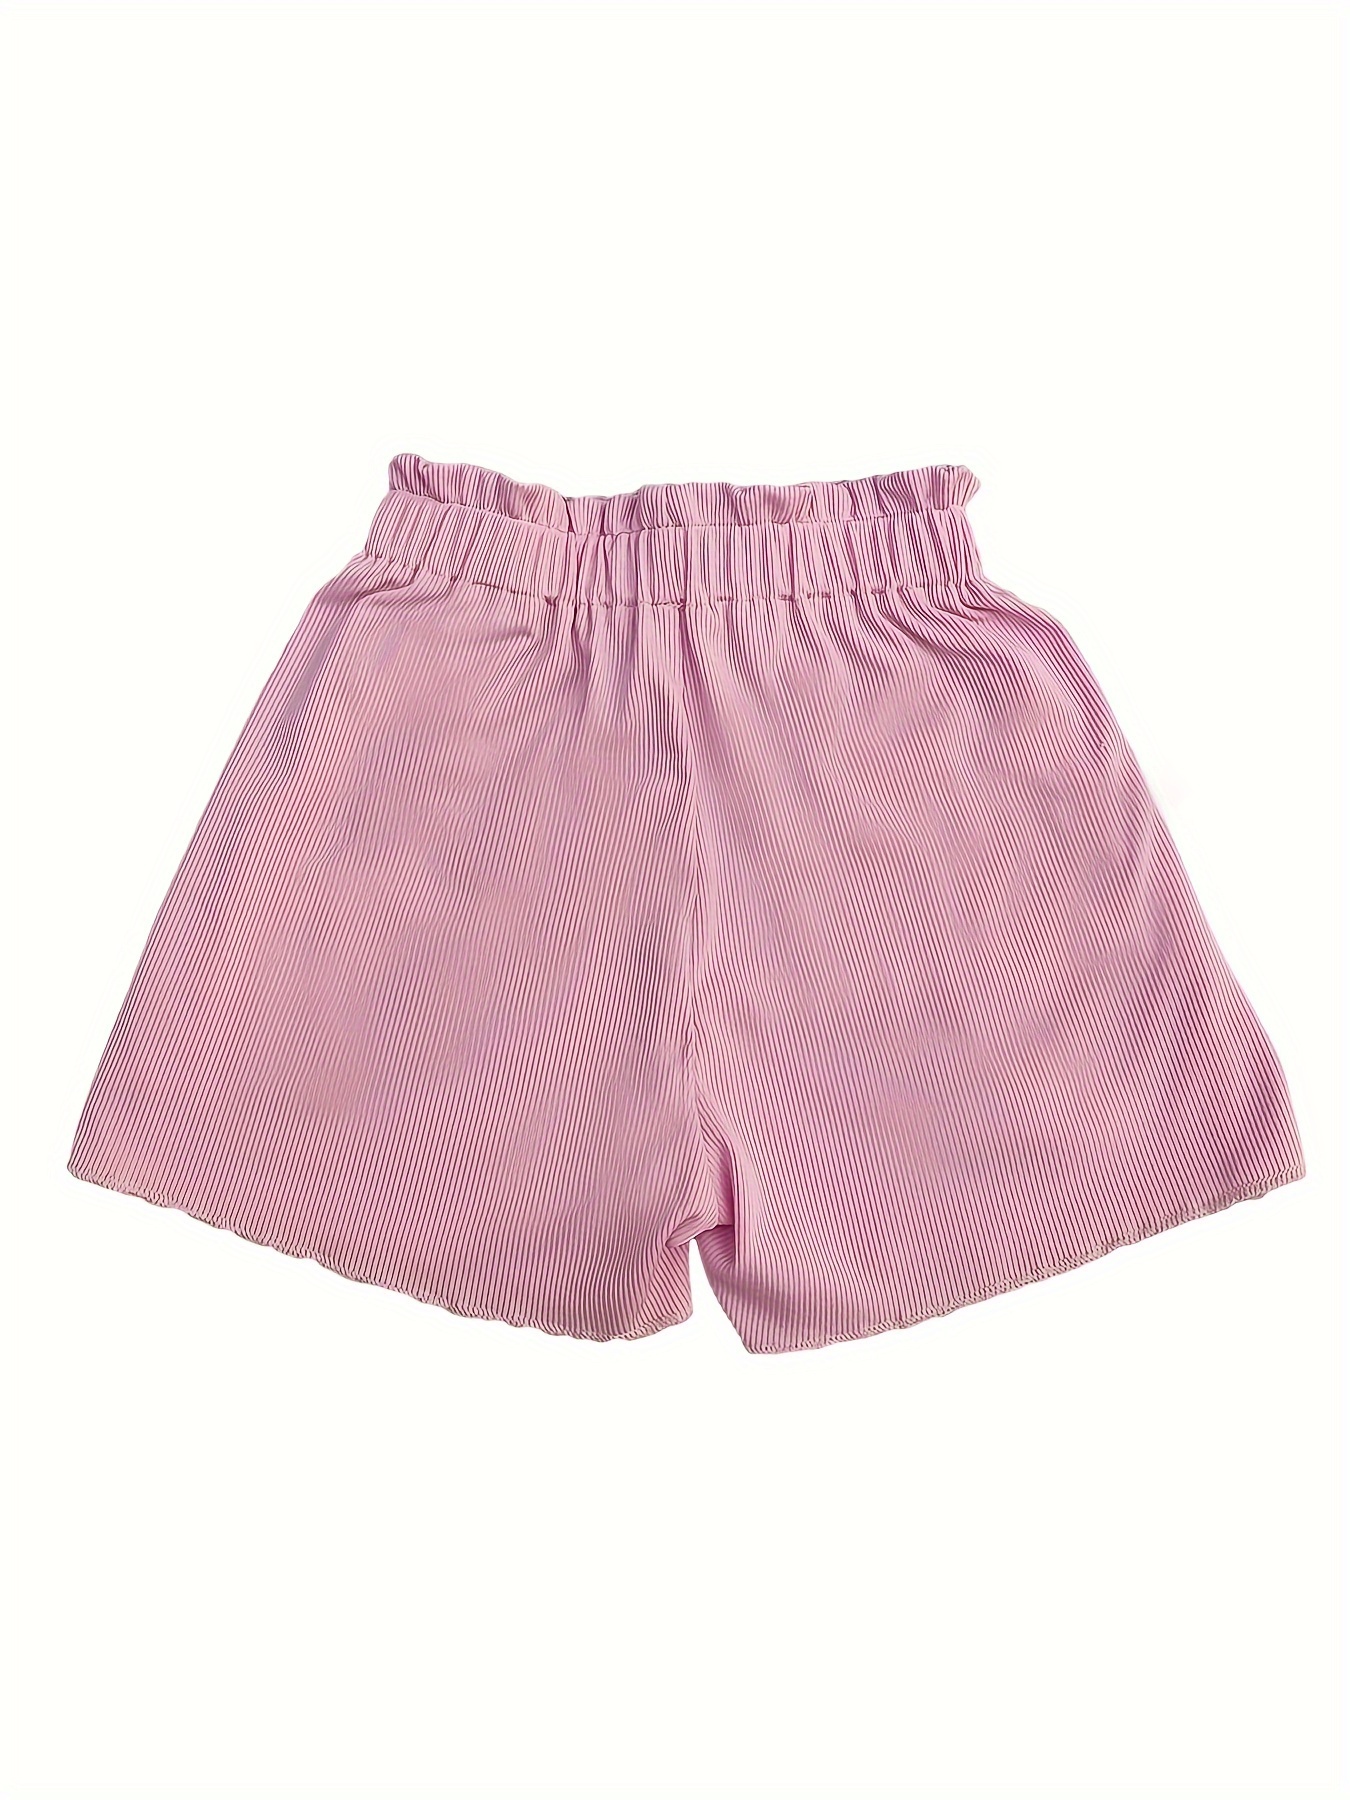 girls solid elastic waist shorts trendy shorts summer clothes gift party